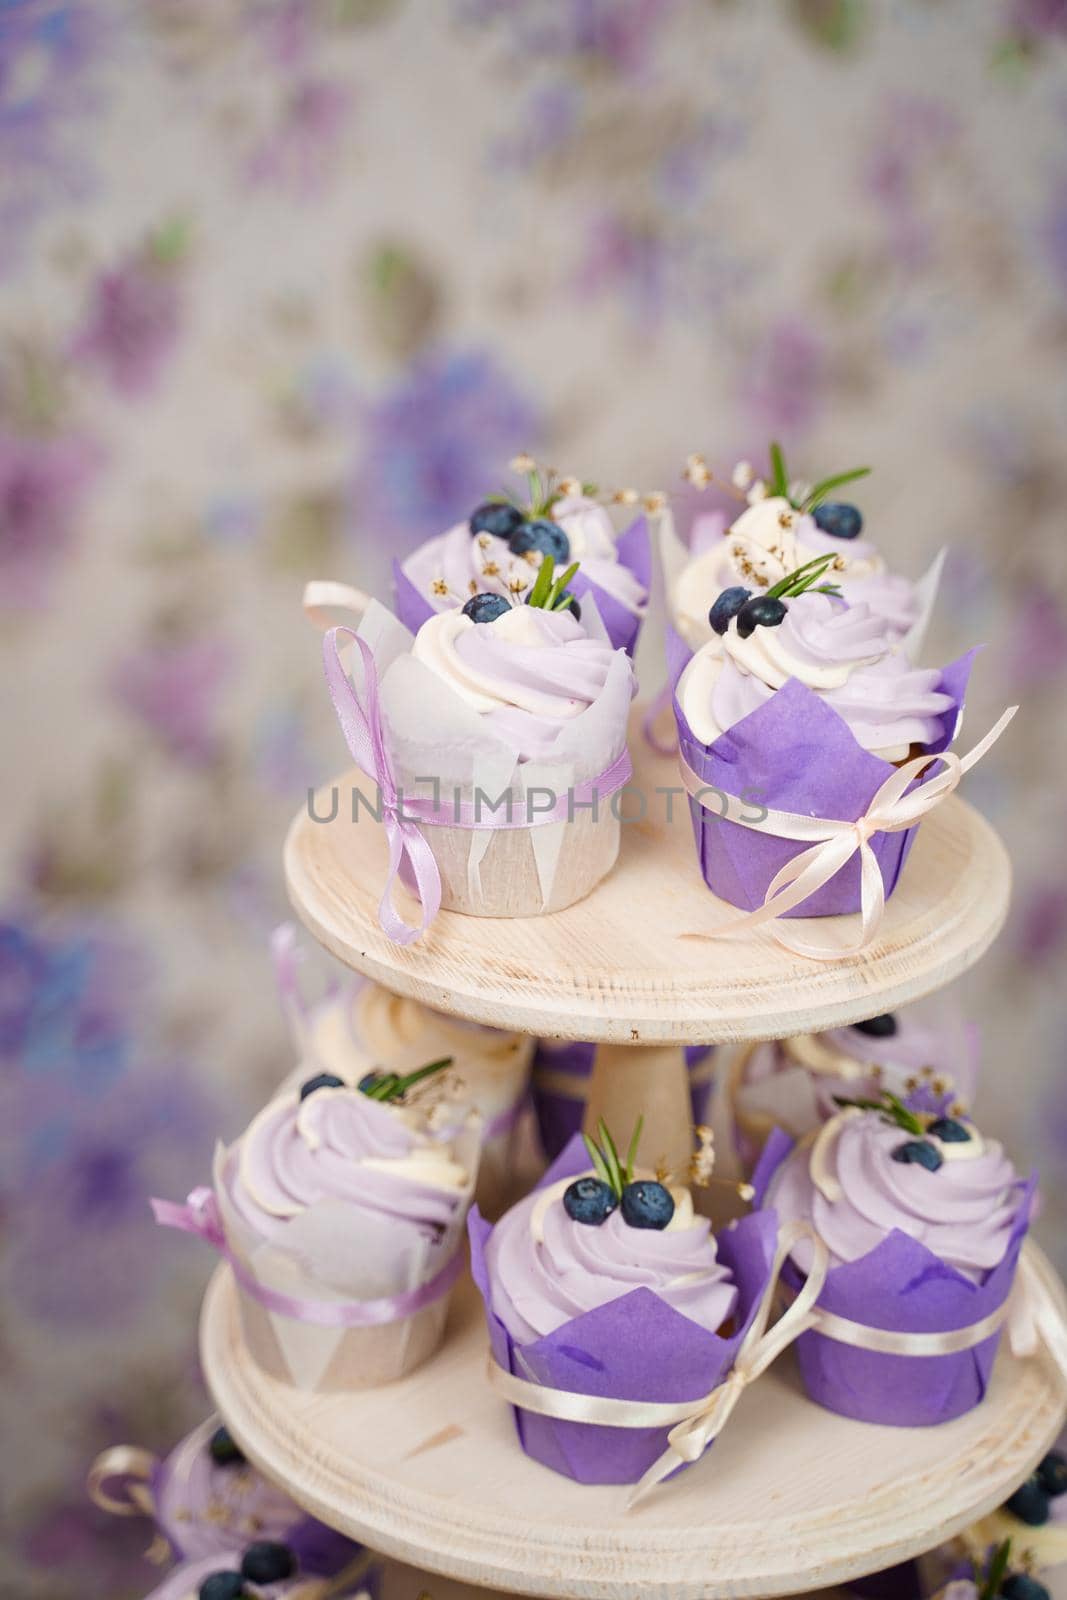 Cupcakes with cream in a paper tulip form, decorated with blueberries, rosemary, flowers, tied with a ribbon. Vanilla cupcakes with lavender cream. Thematic muffins by Rabizo